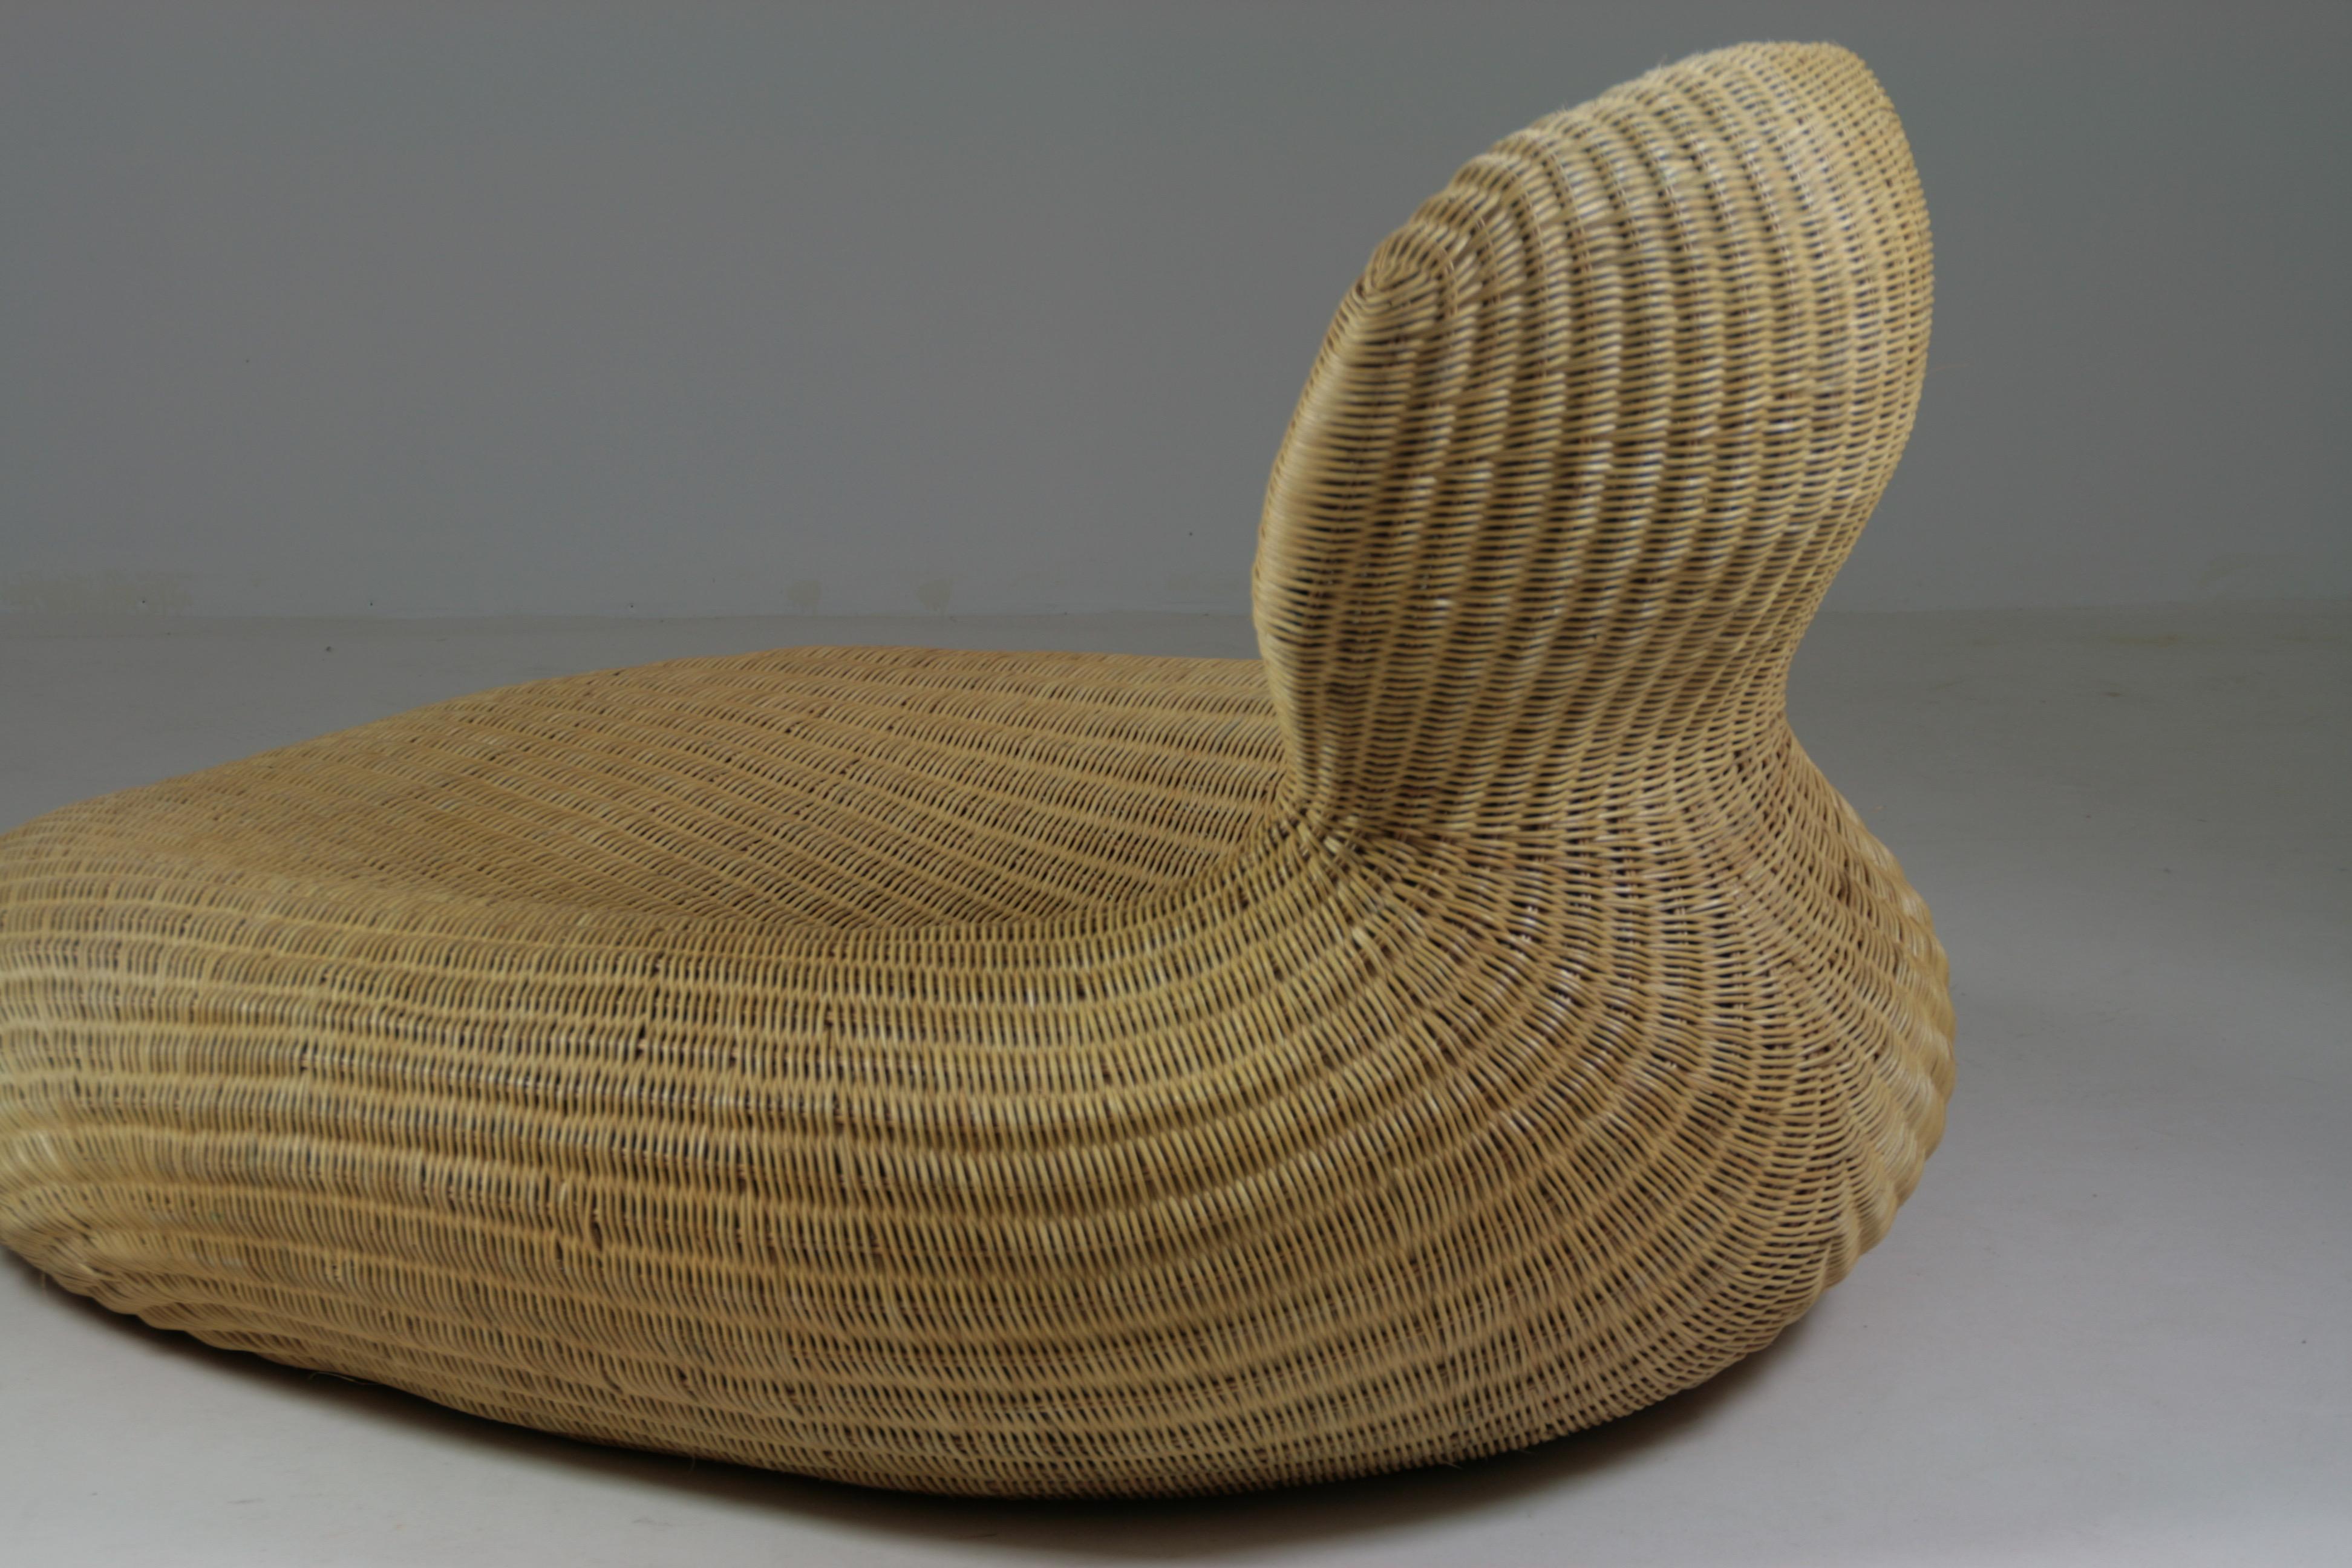 Modern Scandinavian rattan lounge chair designed by Carl öjerstam for Ikea and dating from the 2000s. Structure in bamboo and woven rattan. This rounded chair was in limited production at Ikea Sweden from 2001 to 2005. Very comfortable and wide seat